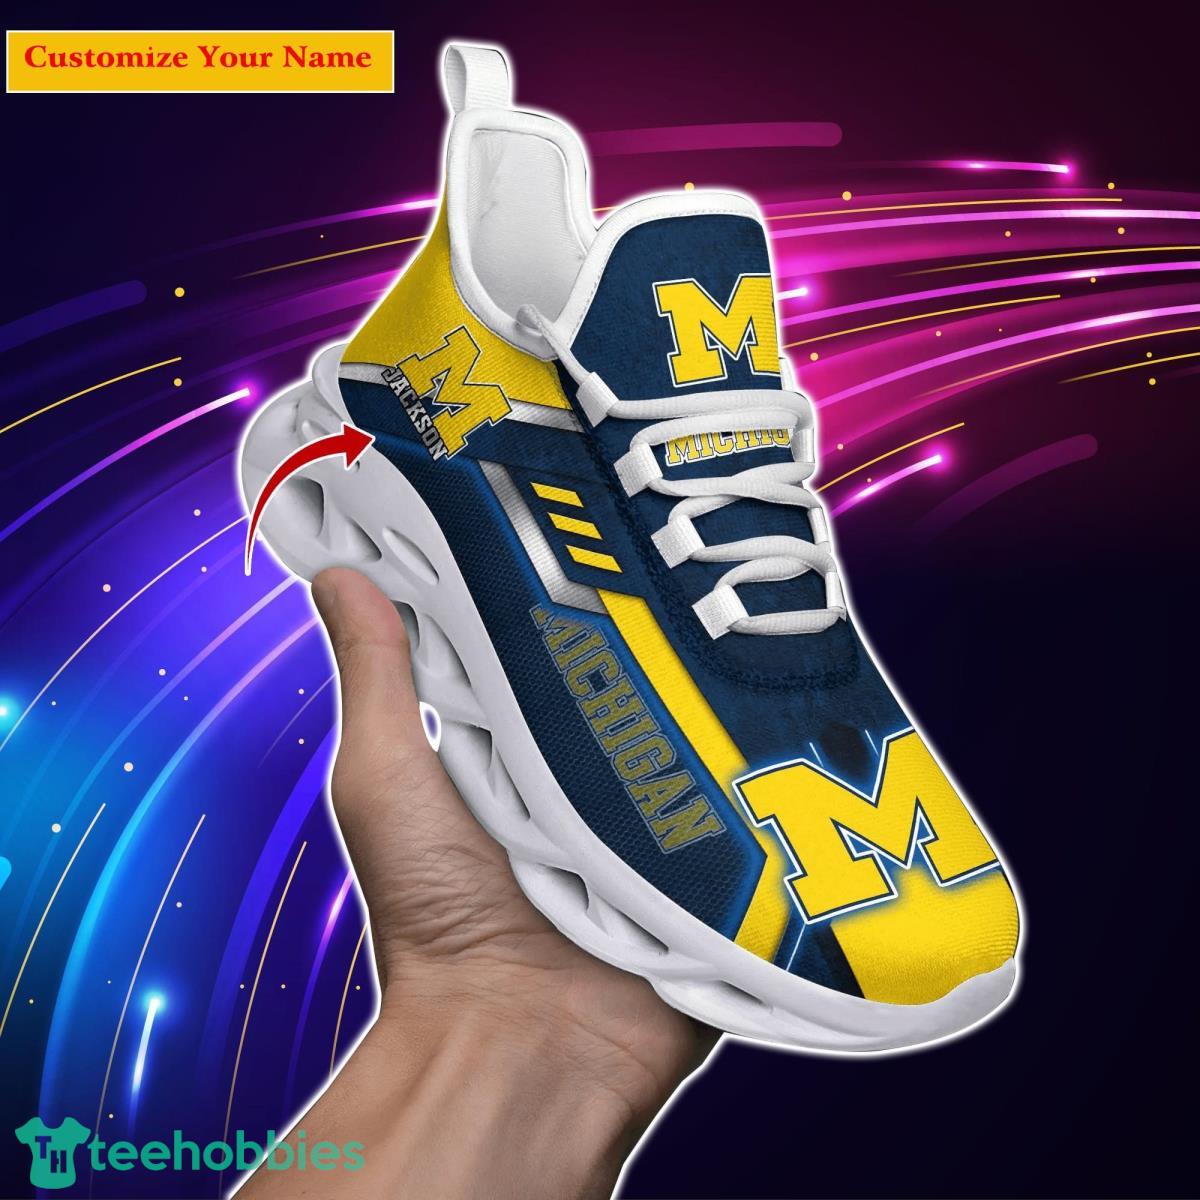 Michigan Wolverines NCAA2 Custom Name Max Soul Shoes Impressive Gift For Men Women Fans Product Photo 1